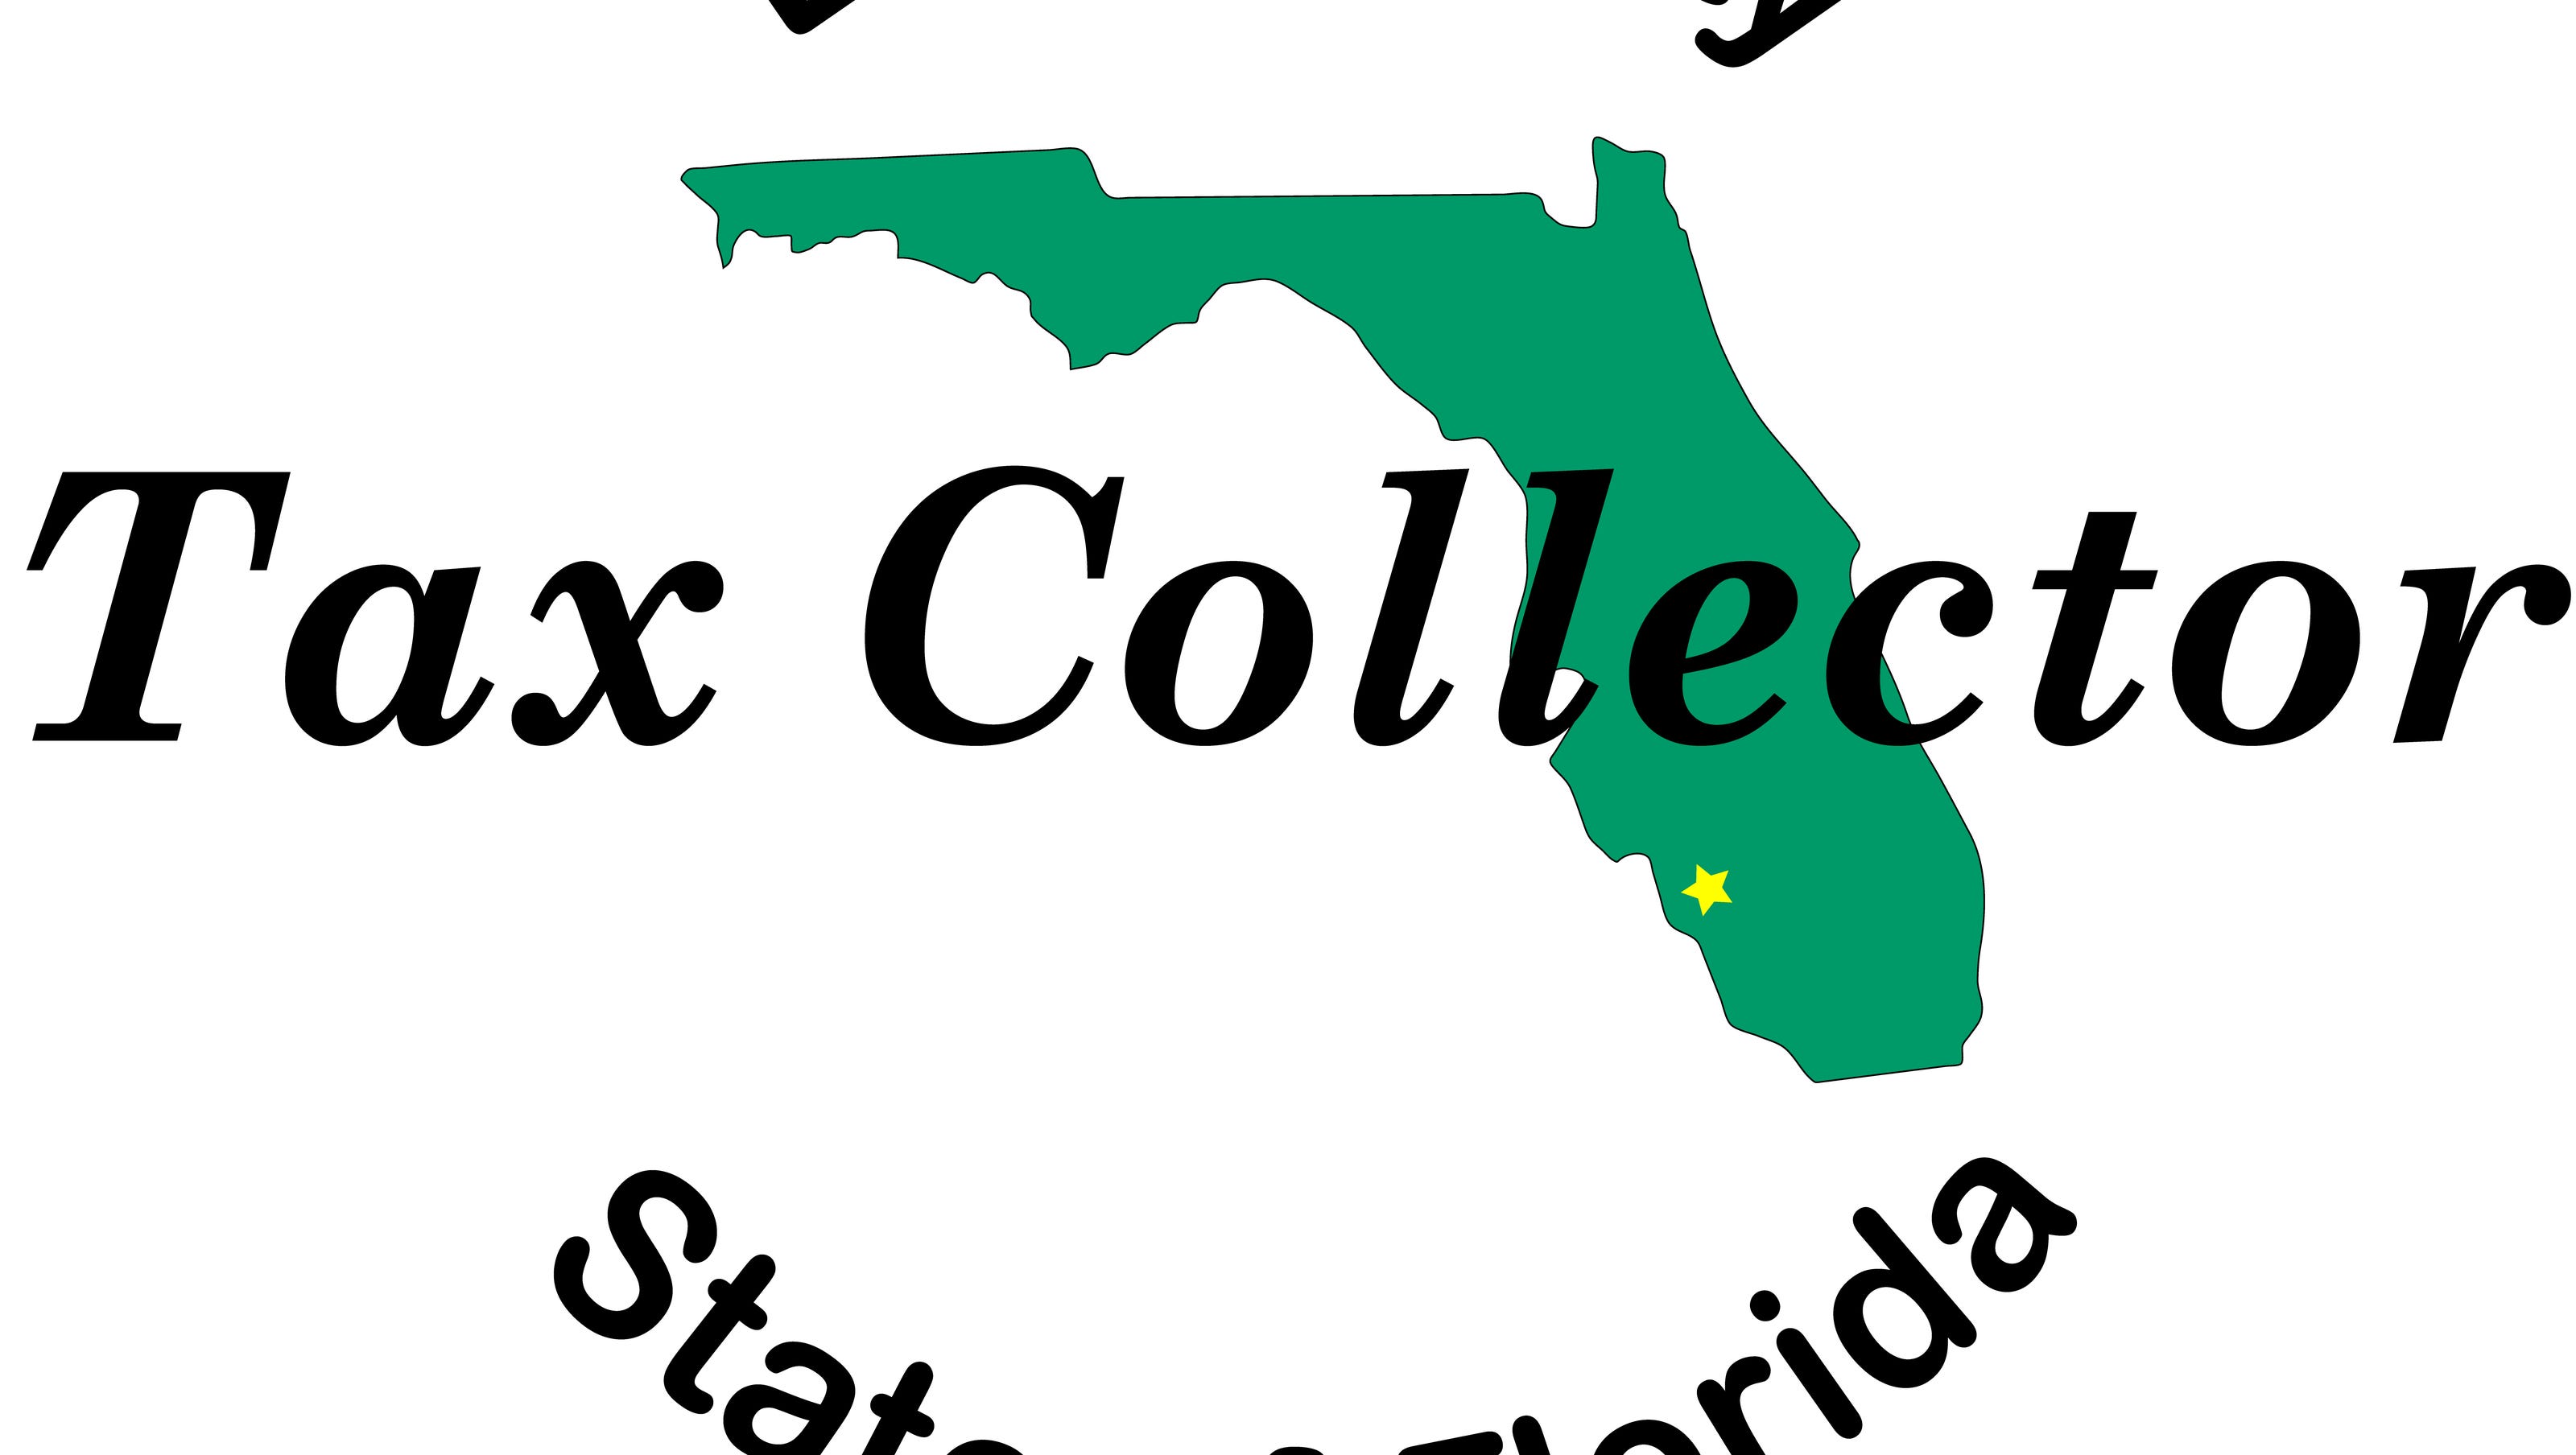 Road driving test appointments at Lee County Tax Collector hard to get